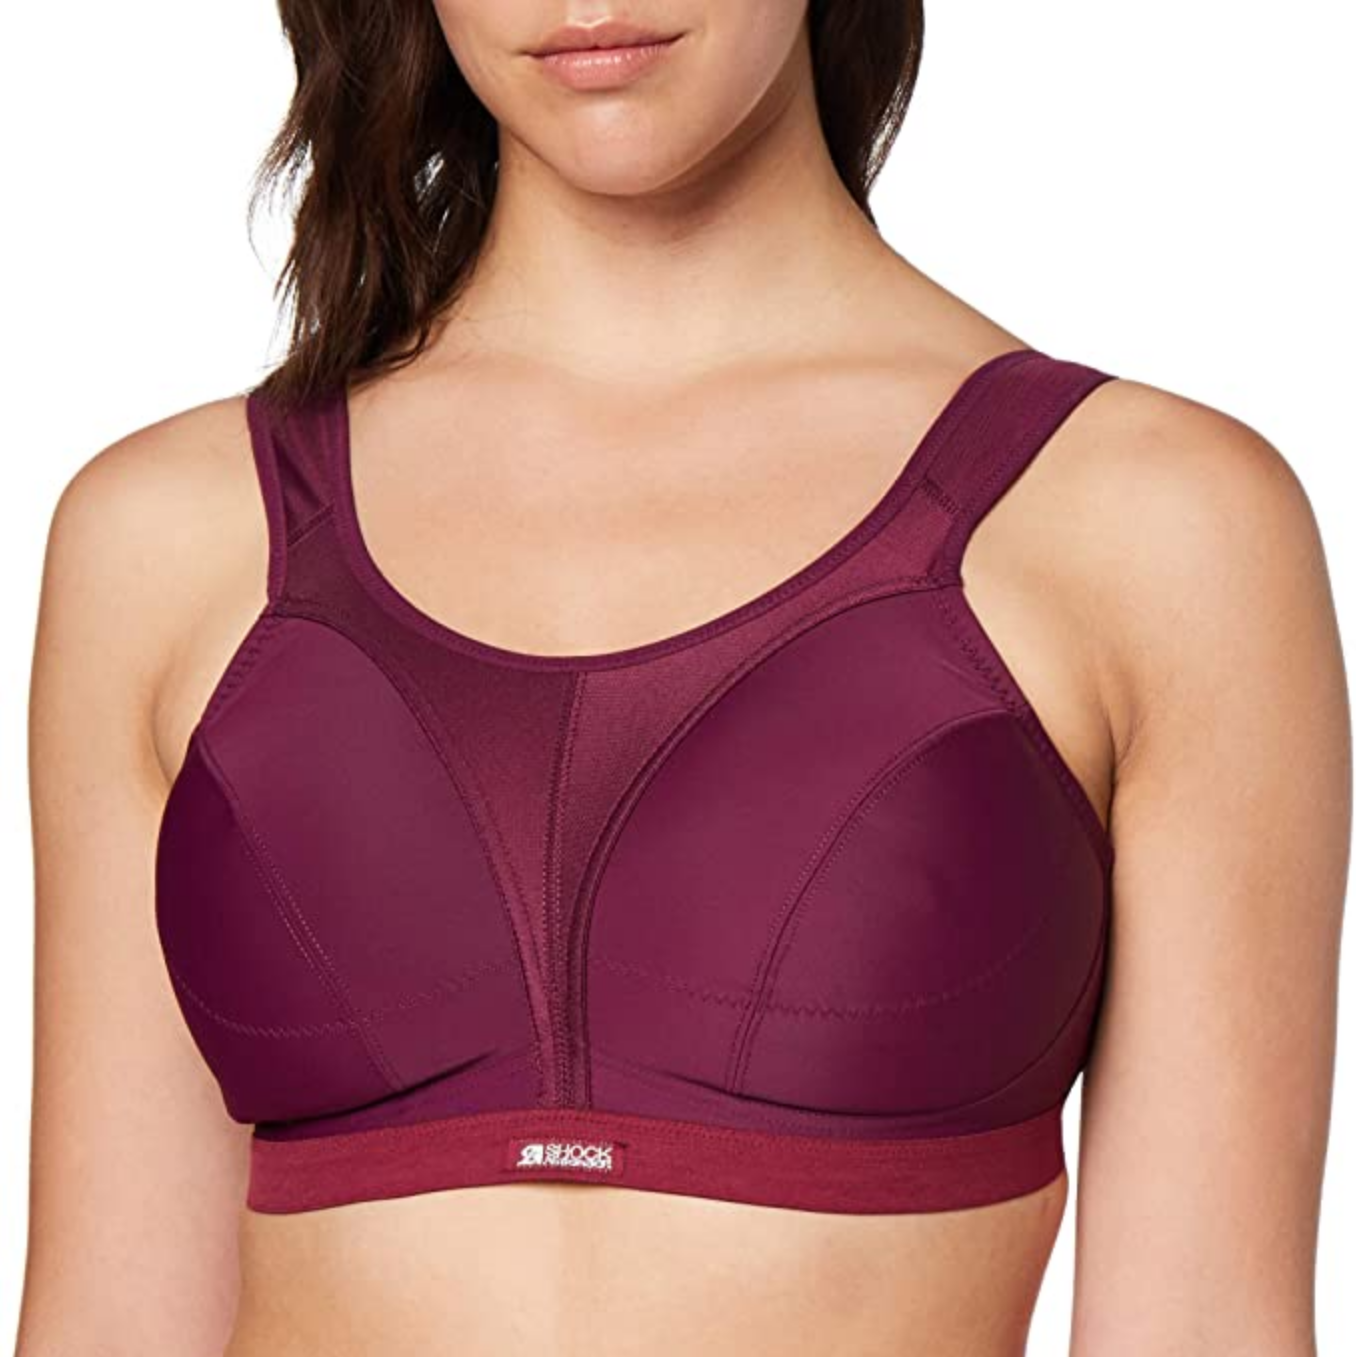 TOP SPORTS BRA FOR MAXIMUM SUPPORT 